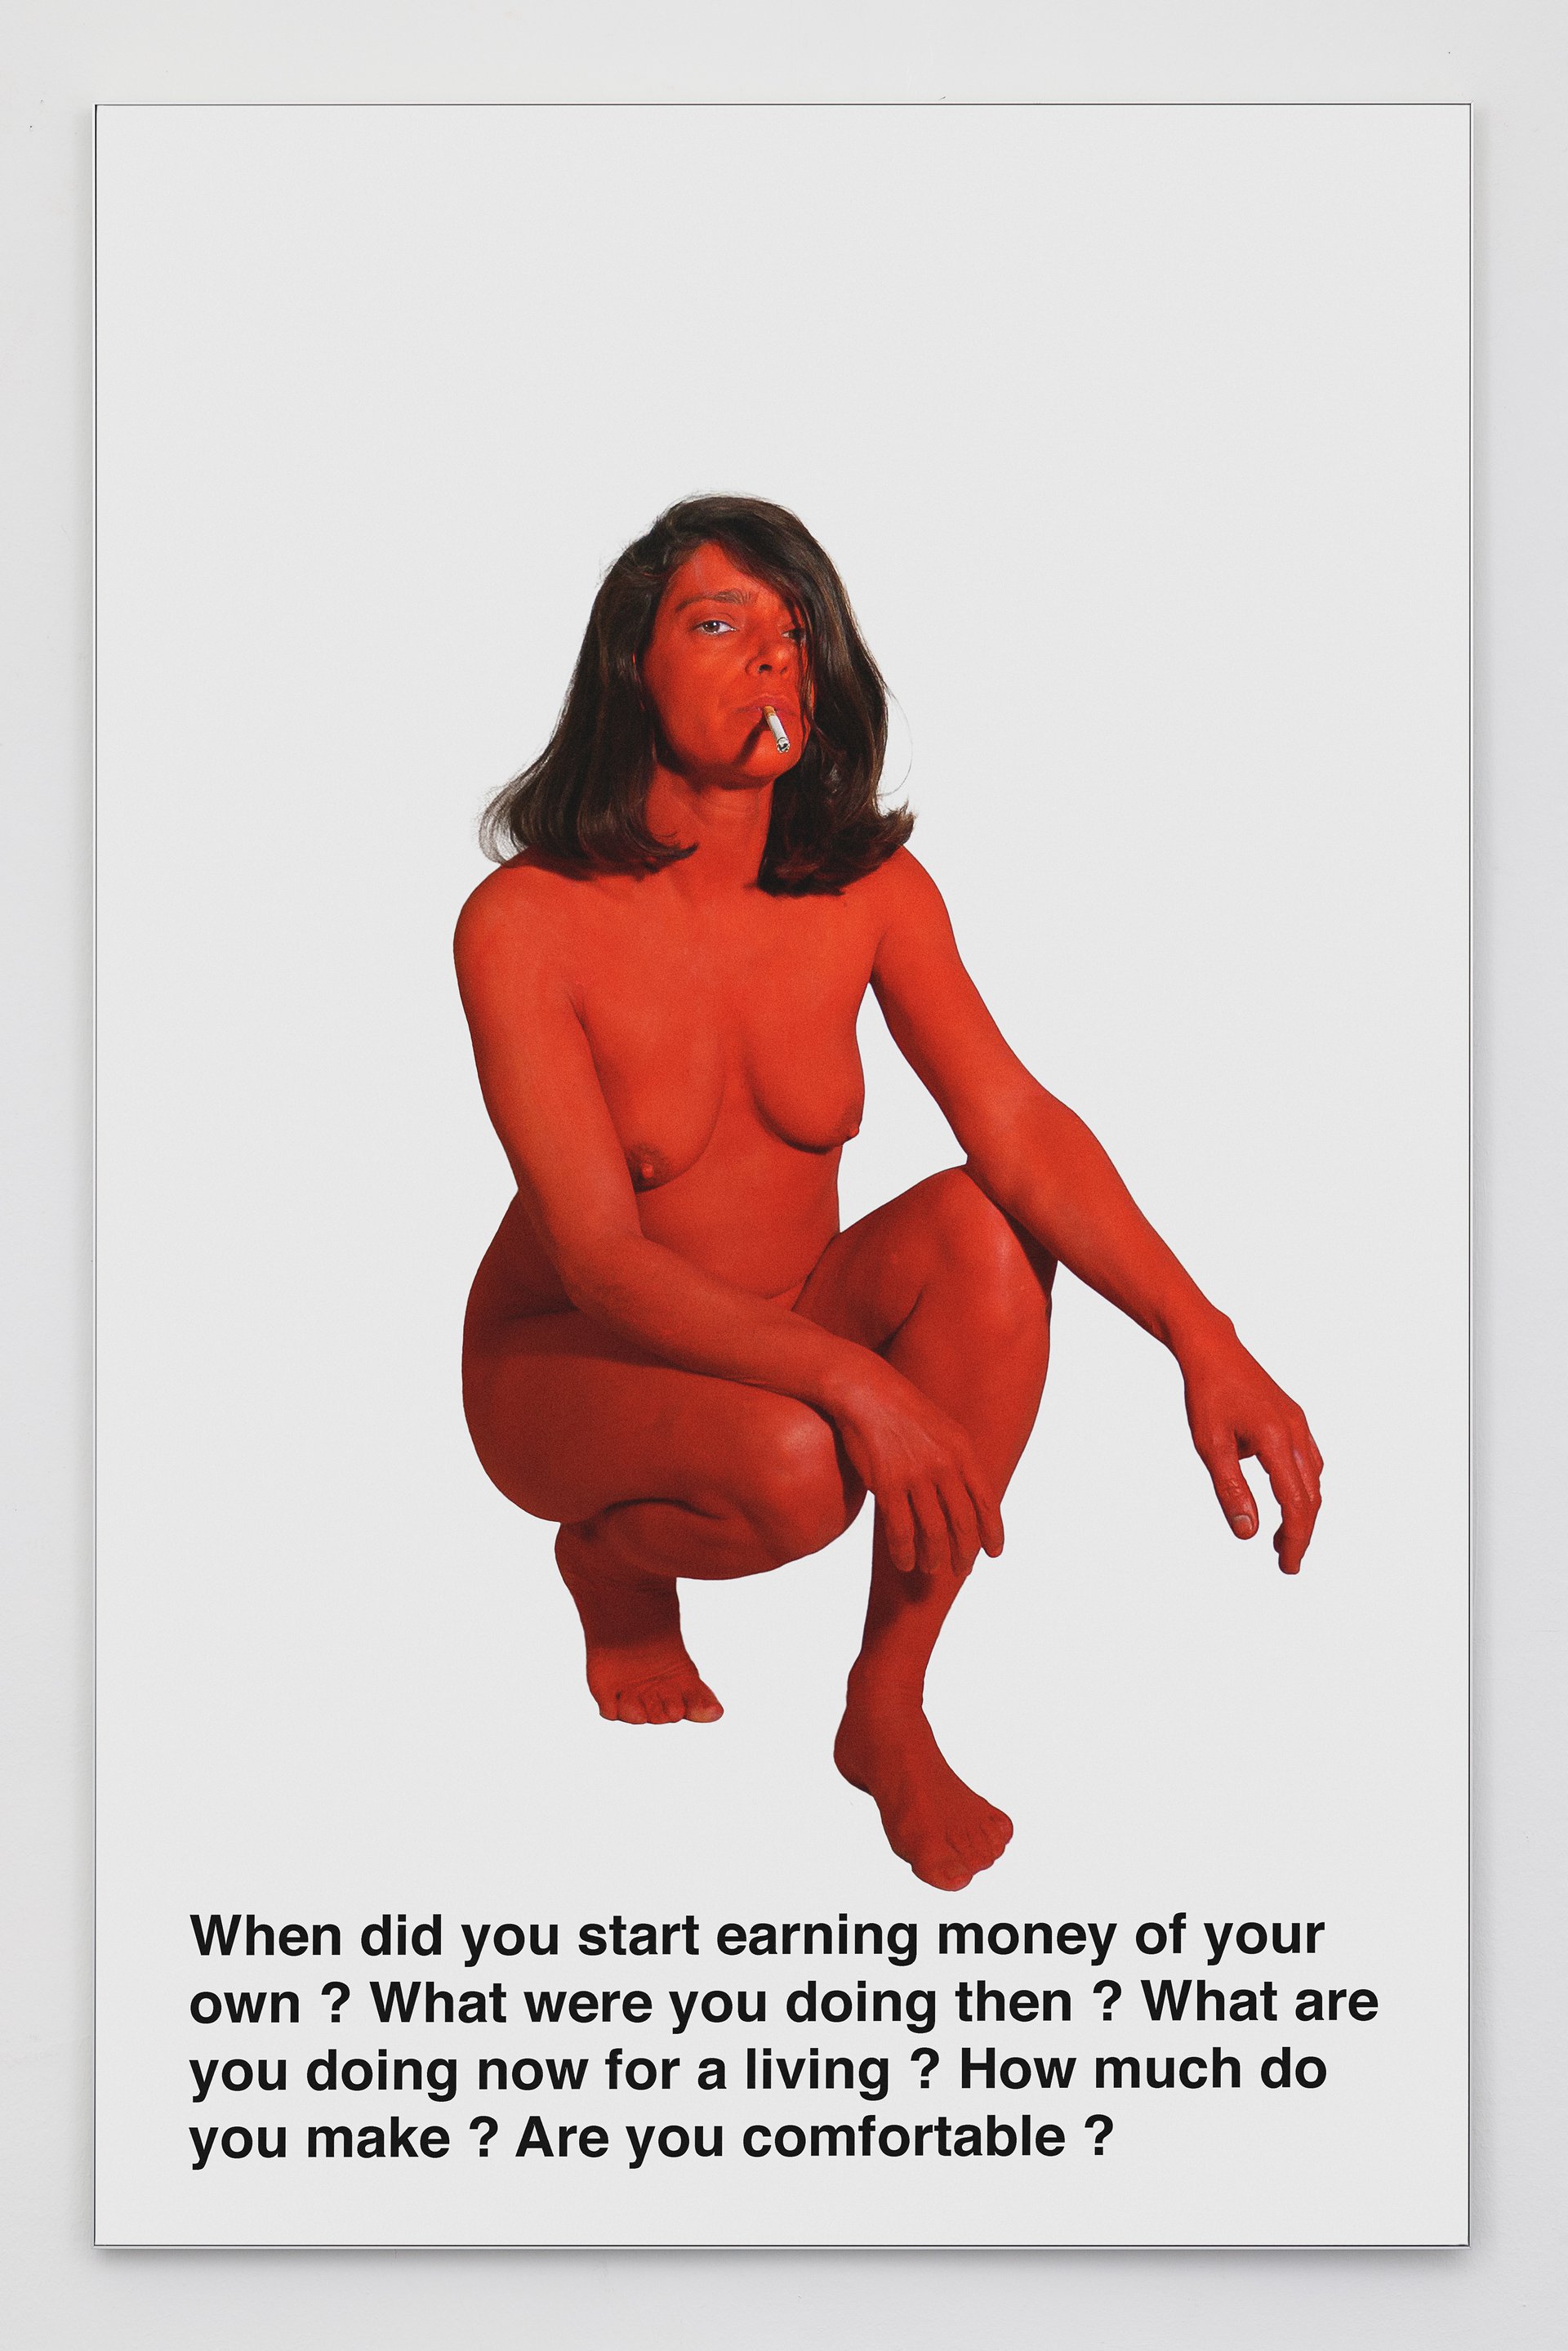 Lili Reynaud-DewarWhen did you start earning money of your own ? What were you doing then ? What are you doing now for a living ? How much do you make ? Are you comfortable ?, 2022Print on Dynajet foil mounted on aluminium frame90 x 140 cm